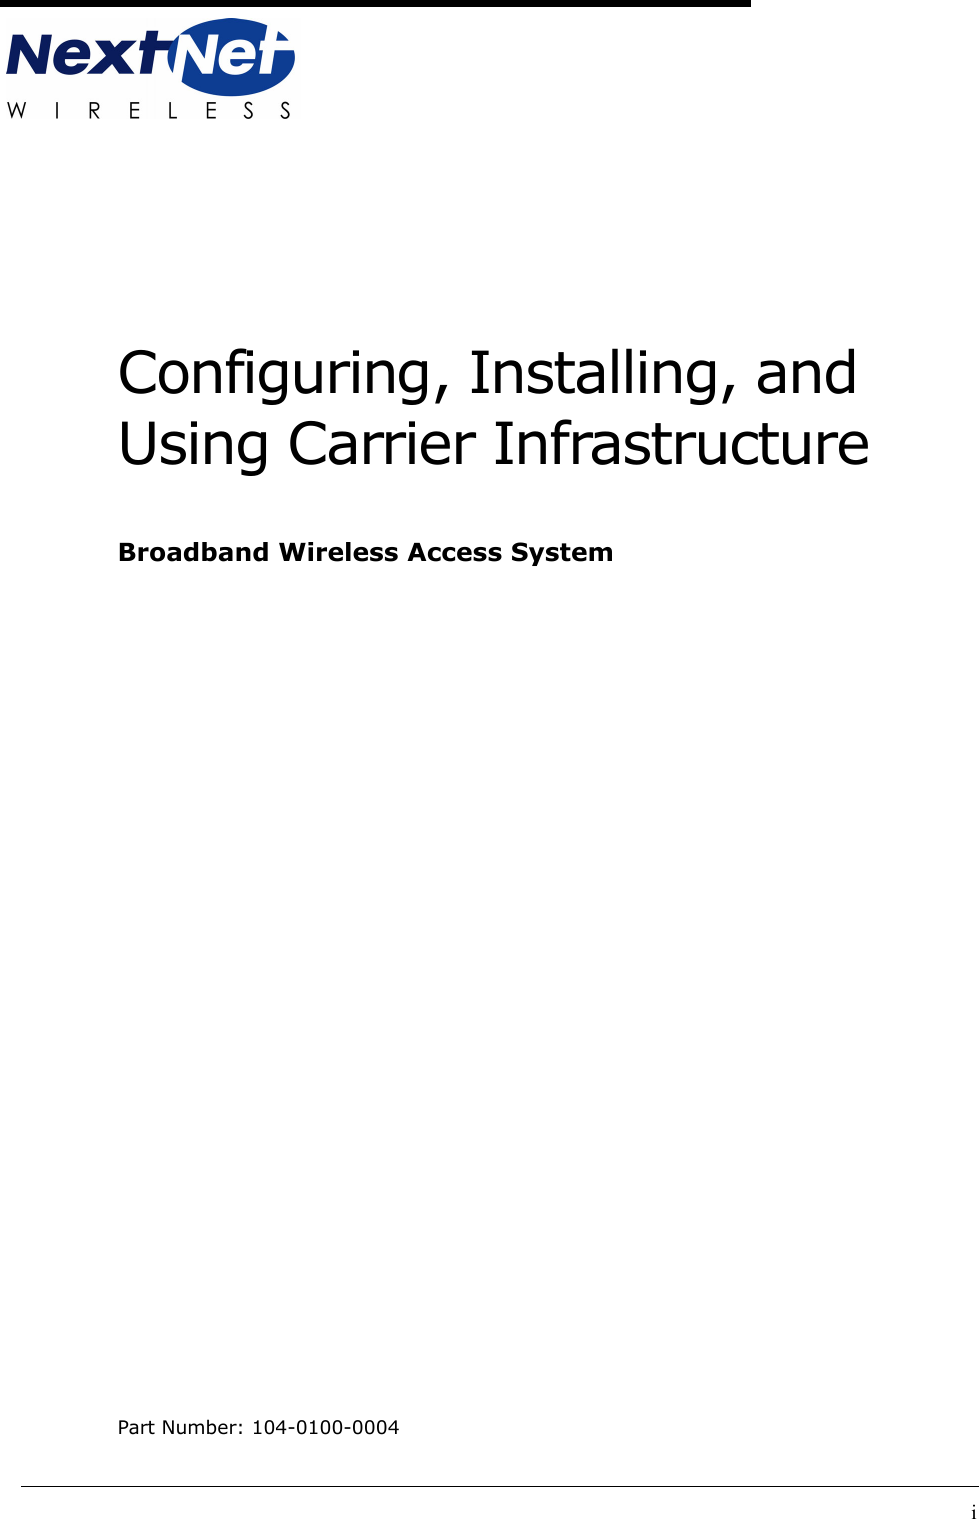 iConfiguring, Installing, and Using Carrier InfrastructureBroadband Wireless Access SystemPart Number: 104-0100-0004